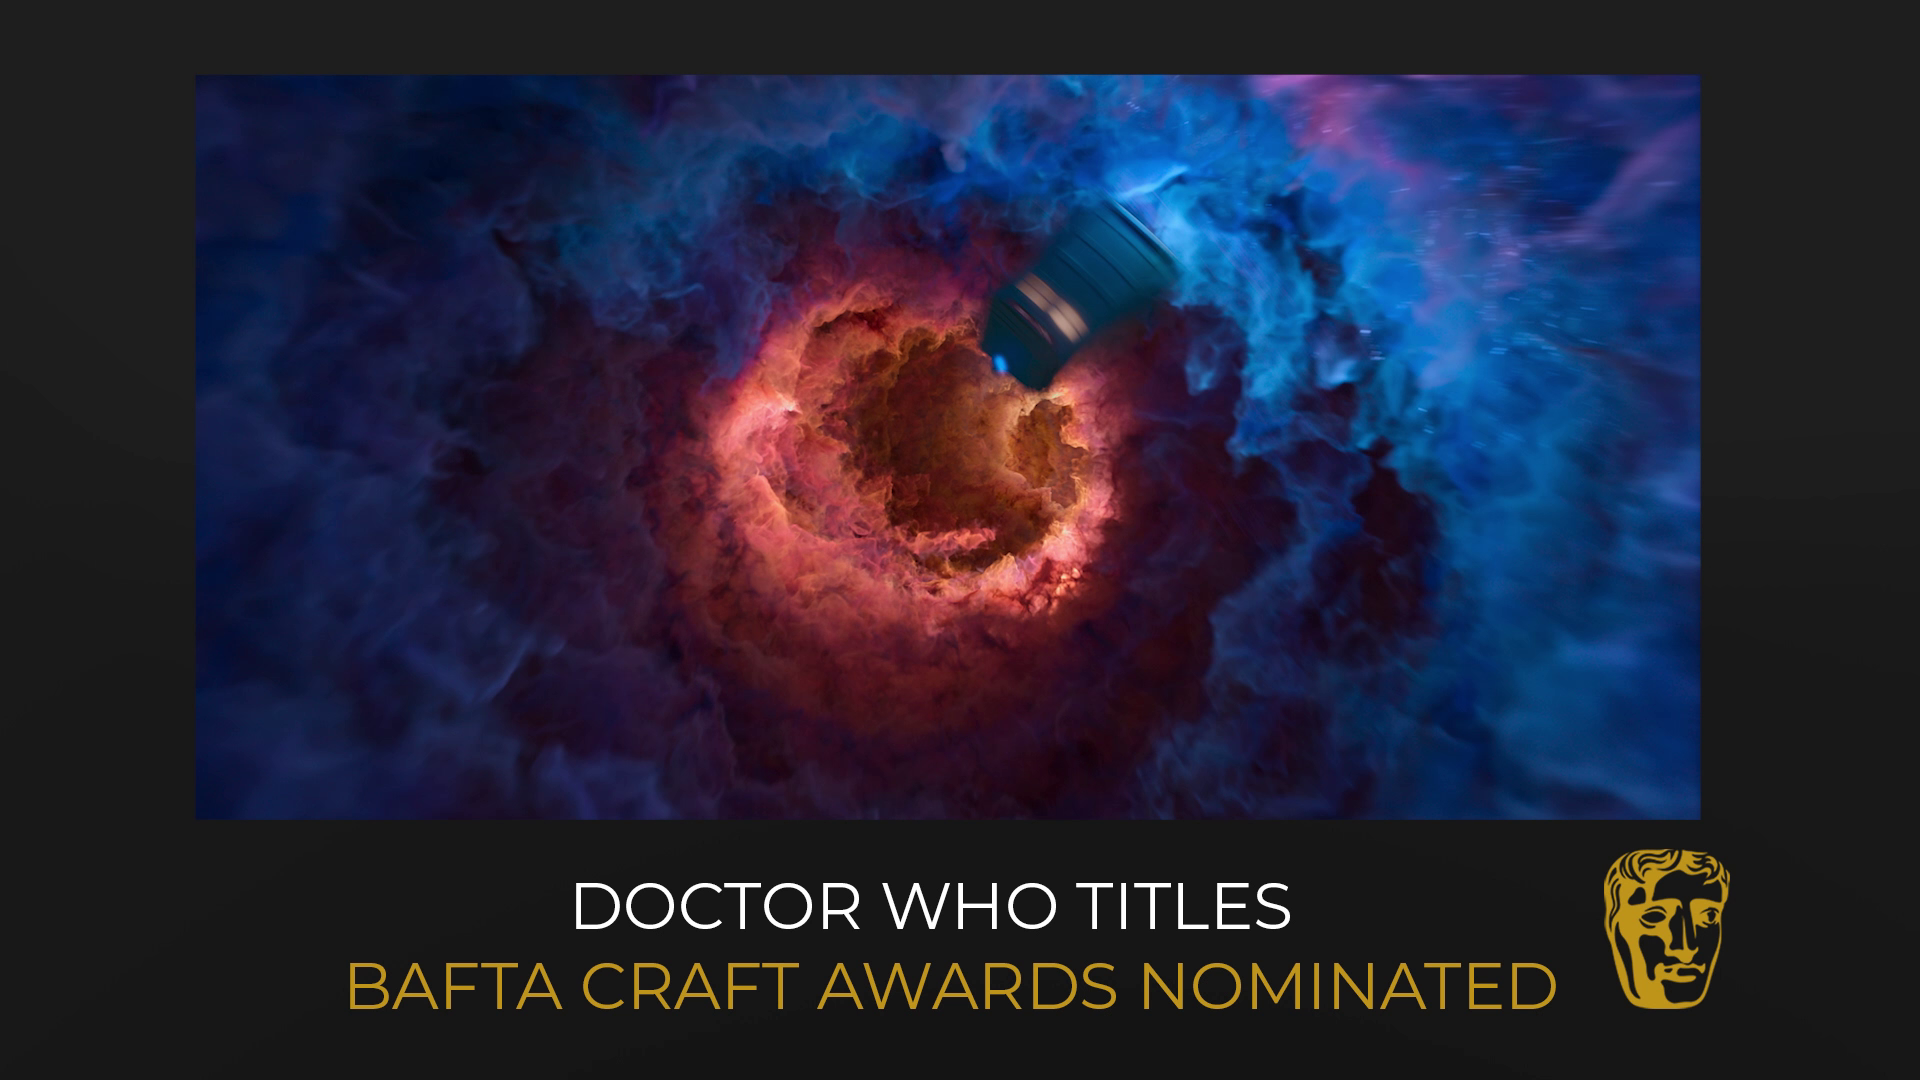 REALTIME Nominated for BAFTA Craft Award for Doctor Who Titles